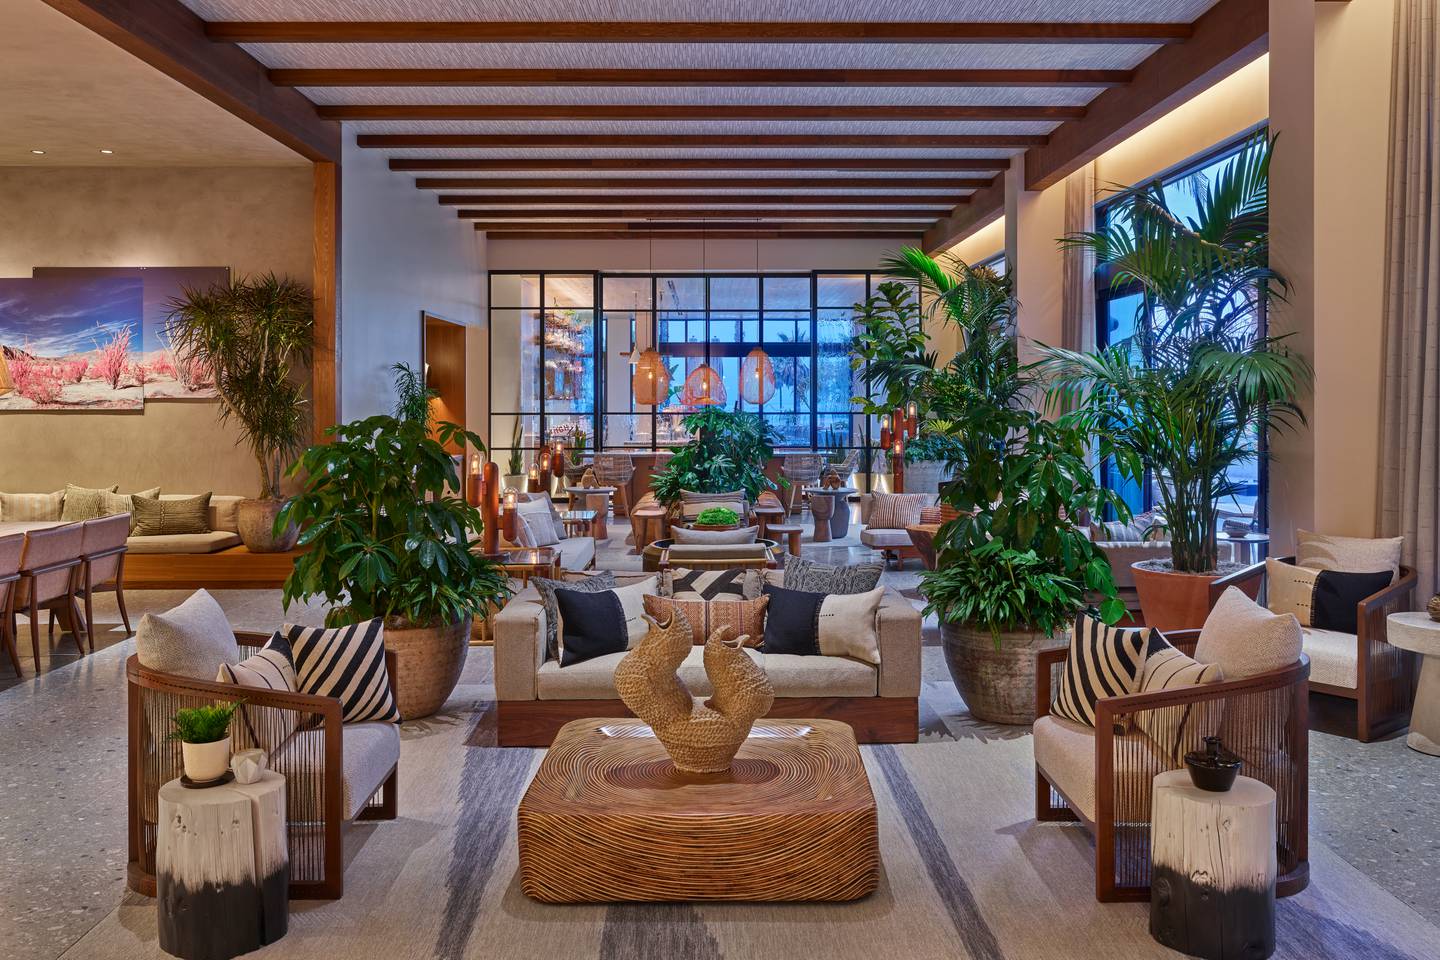 Lobby of Mission Pacific Hotel, a new California hotel by Value Retail, operator of Bicester Group's Shopping Villages.